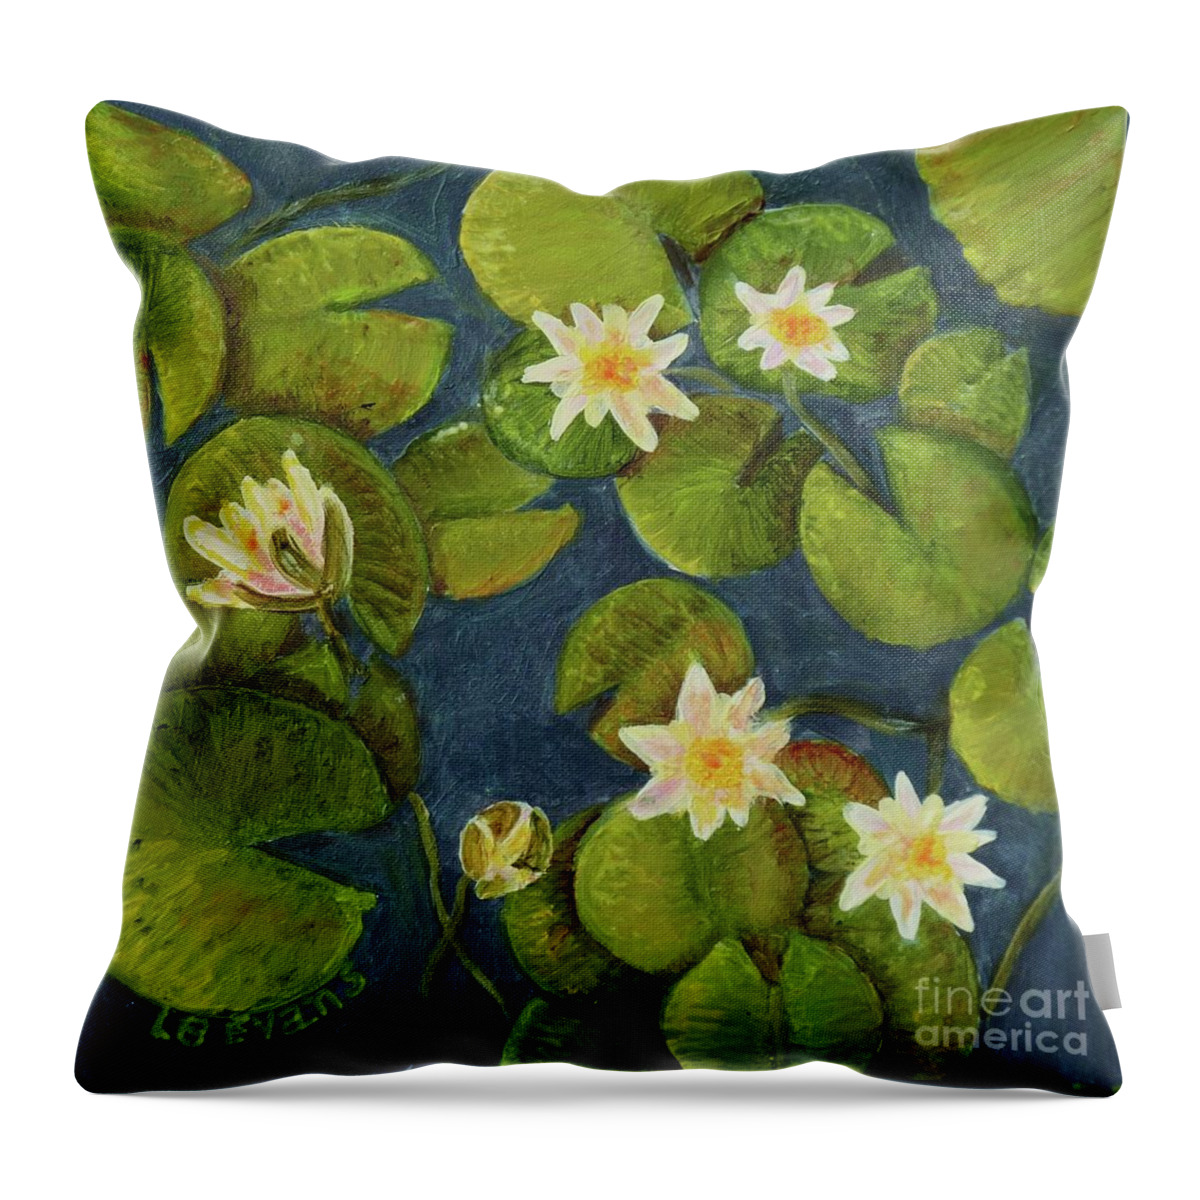 Water Throw Pillow featuring the painting Waterlilies by Lynda Evans